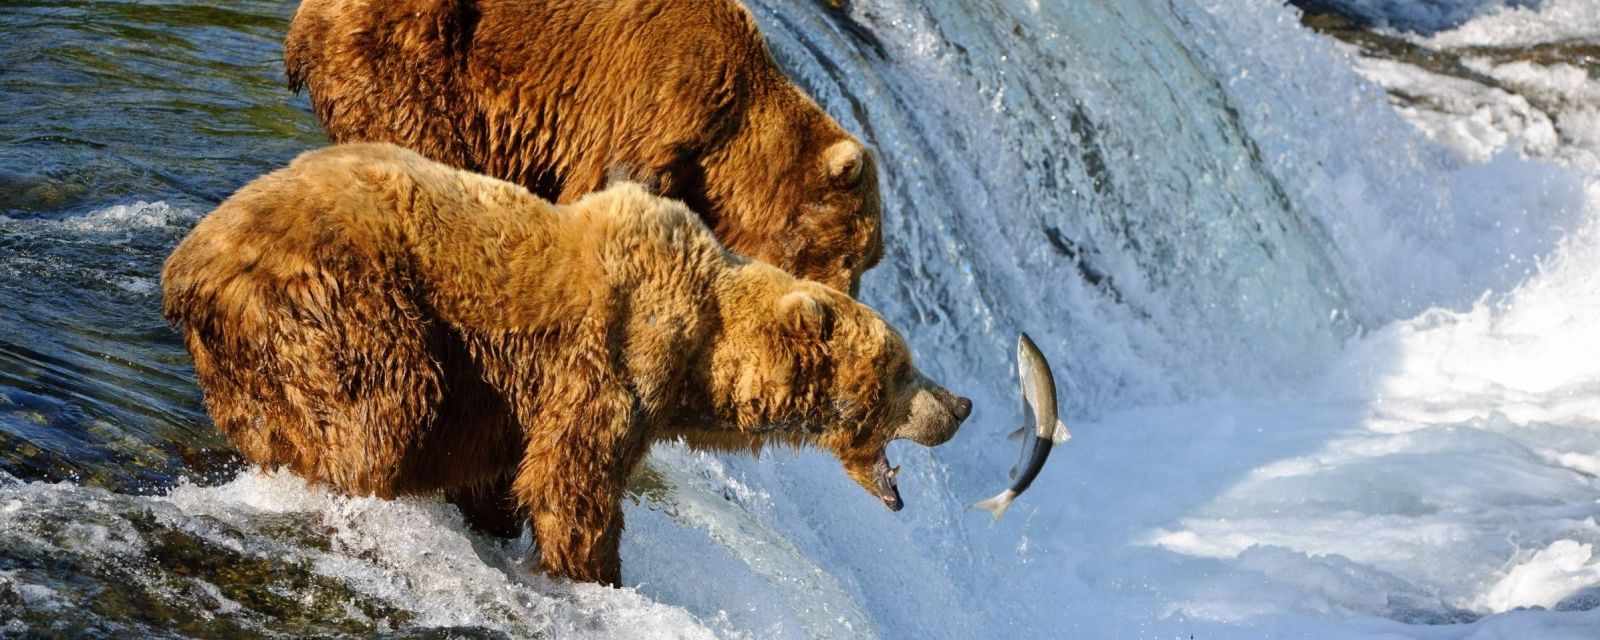 Brown Bears catching salmon in the air at Brooks Falls